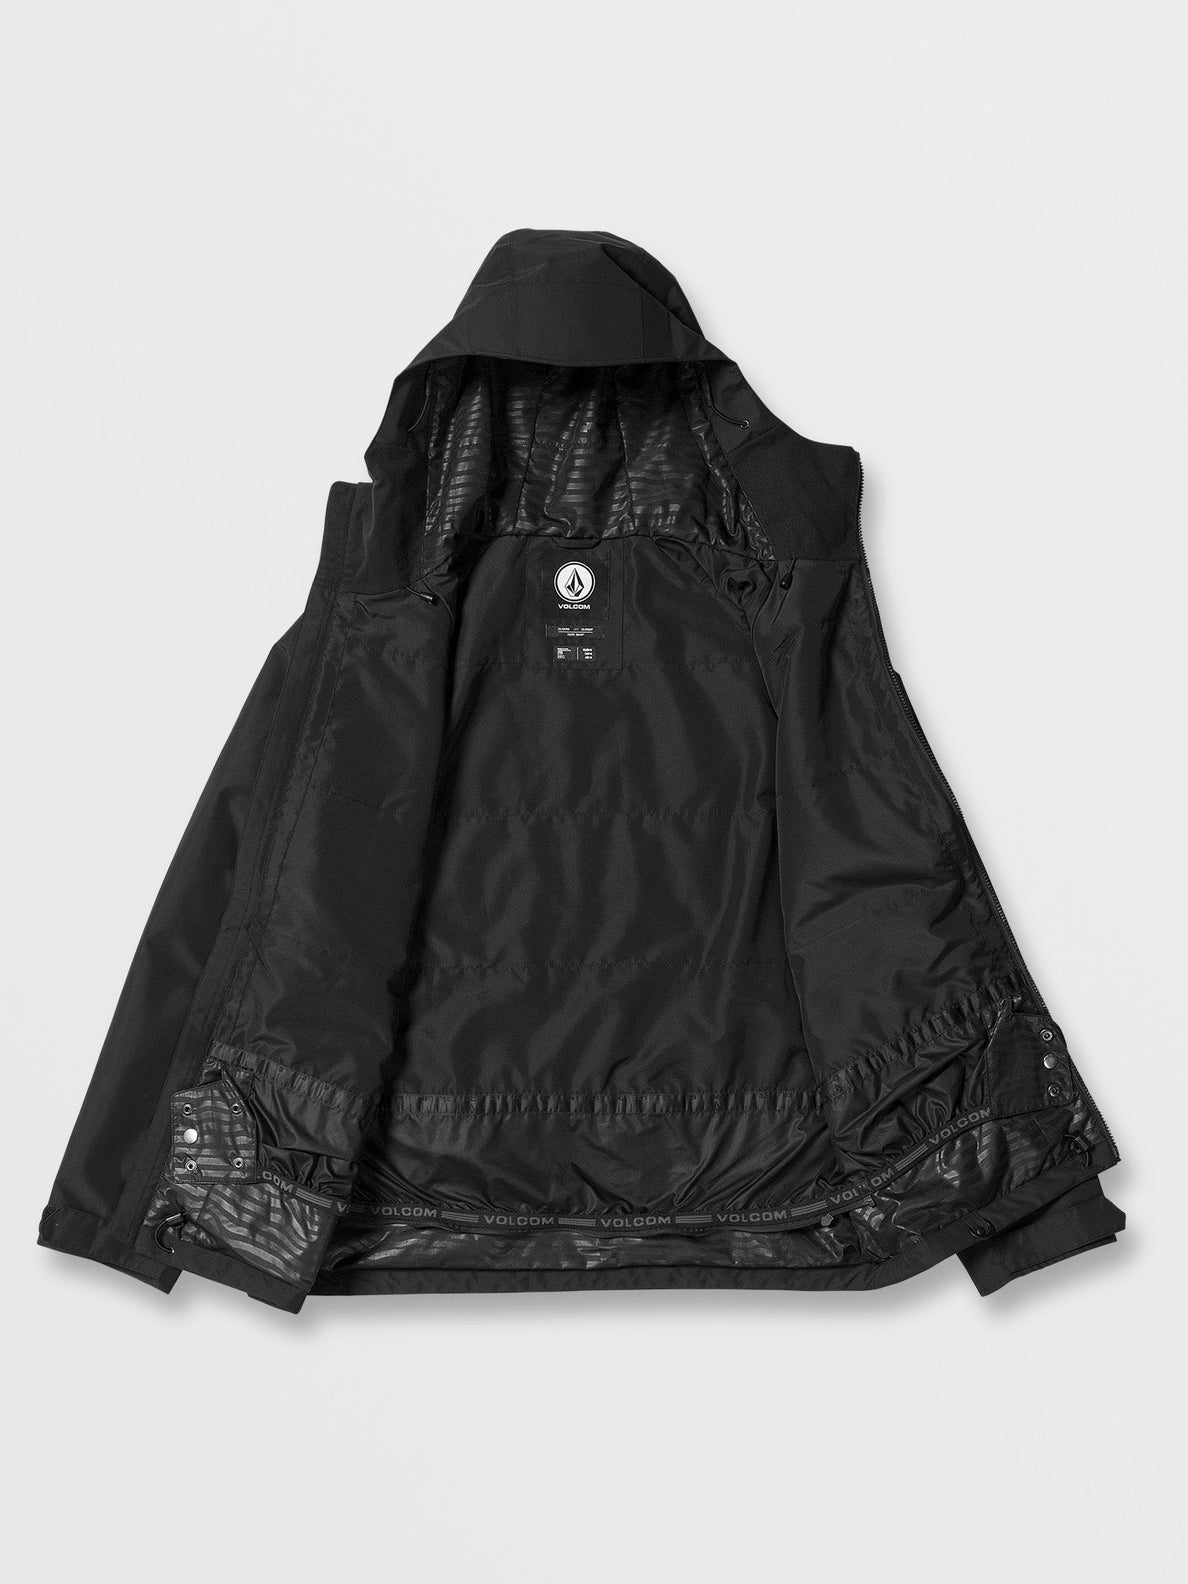 2836 Insulated Jacket - BLACK (G0452408_BLK) [21]